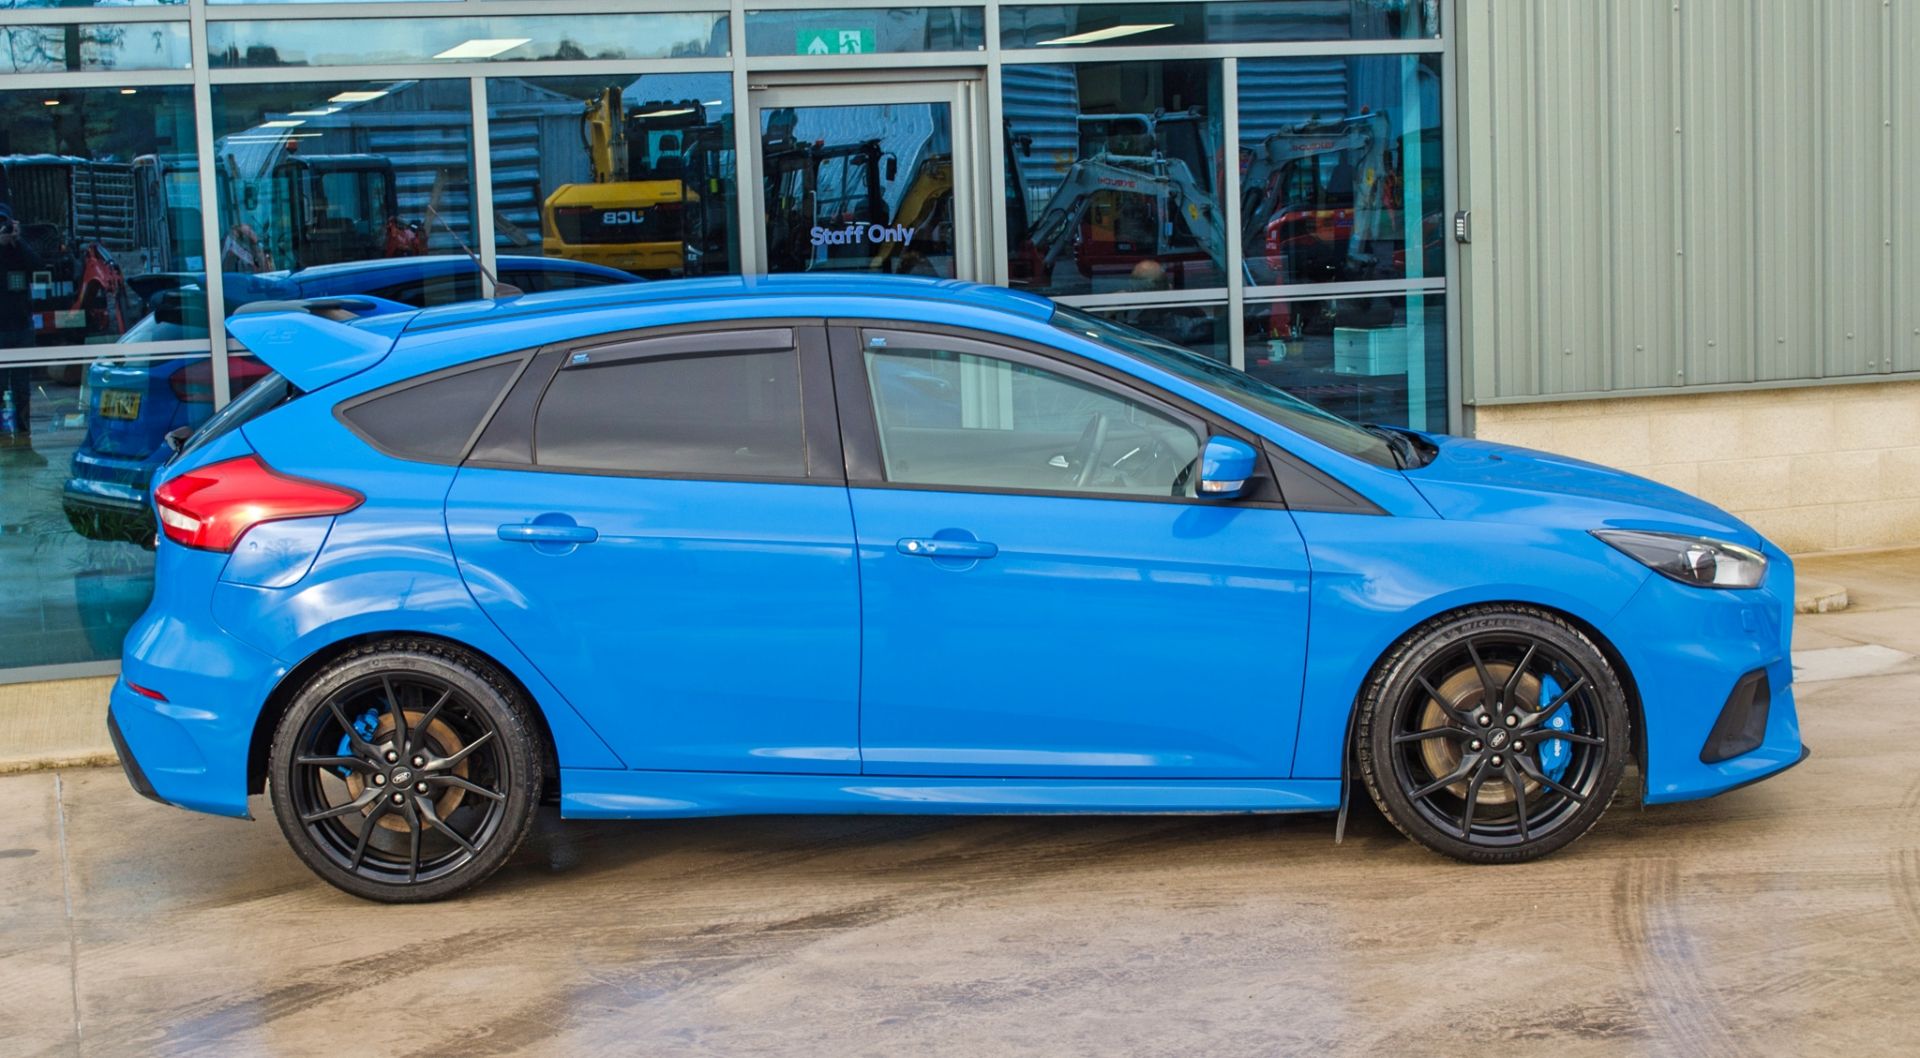 2017 Ford Focus 2.3 RS 5 door hatch back - Image 14 of 56